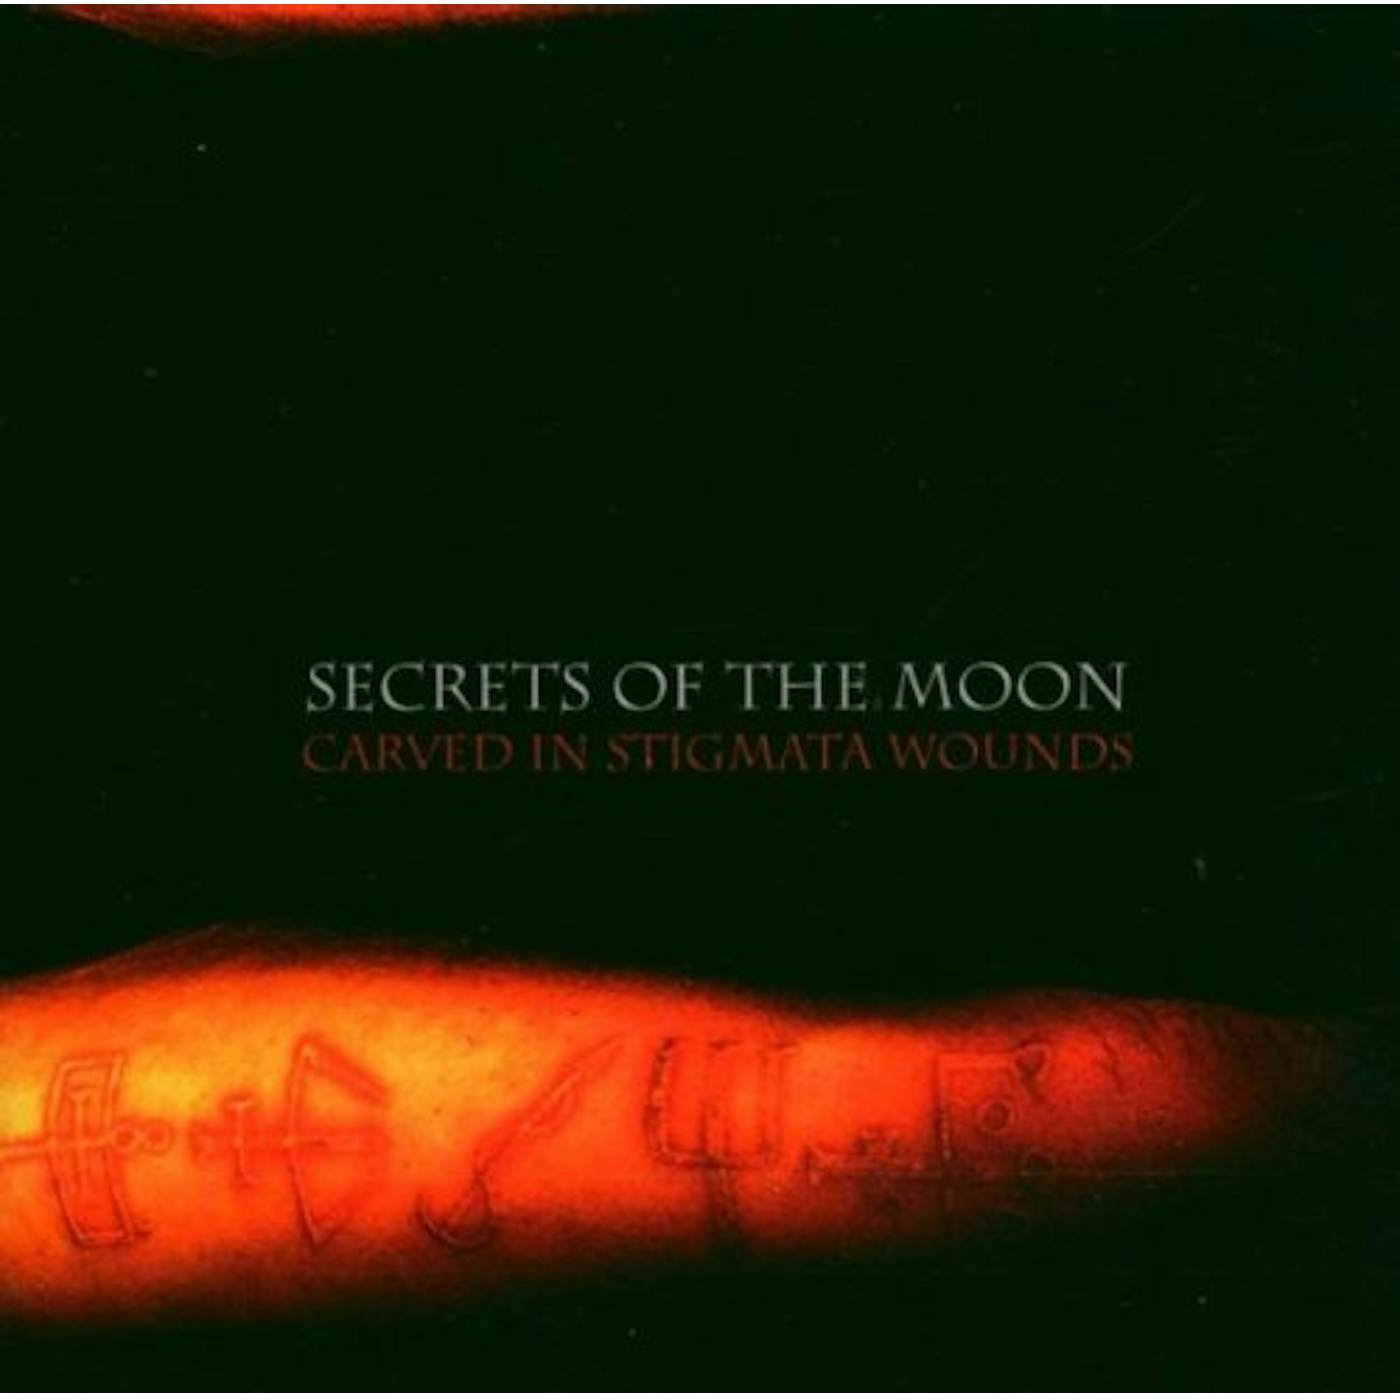 Secrets Of The Moon Carved in Stigmata Wounds Vinyl Record